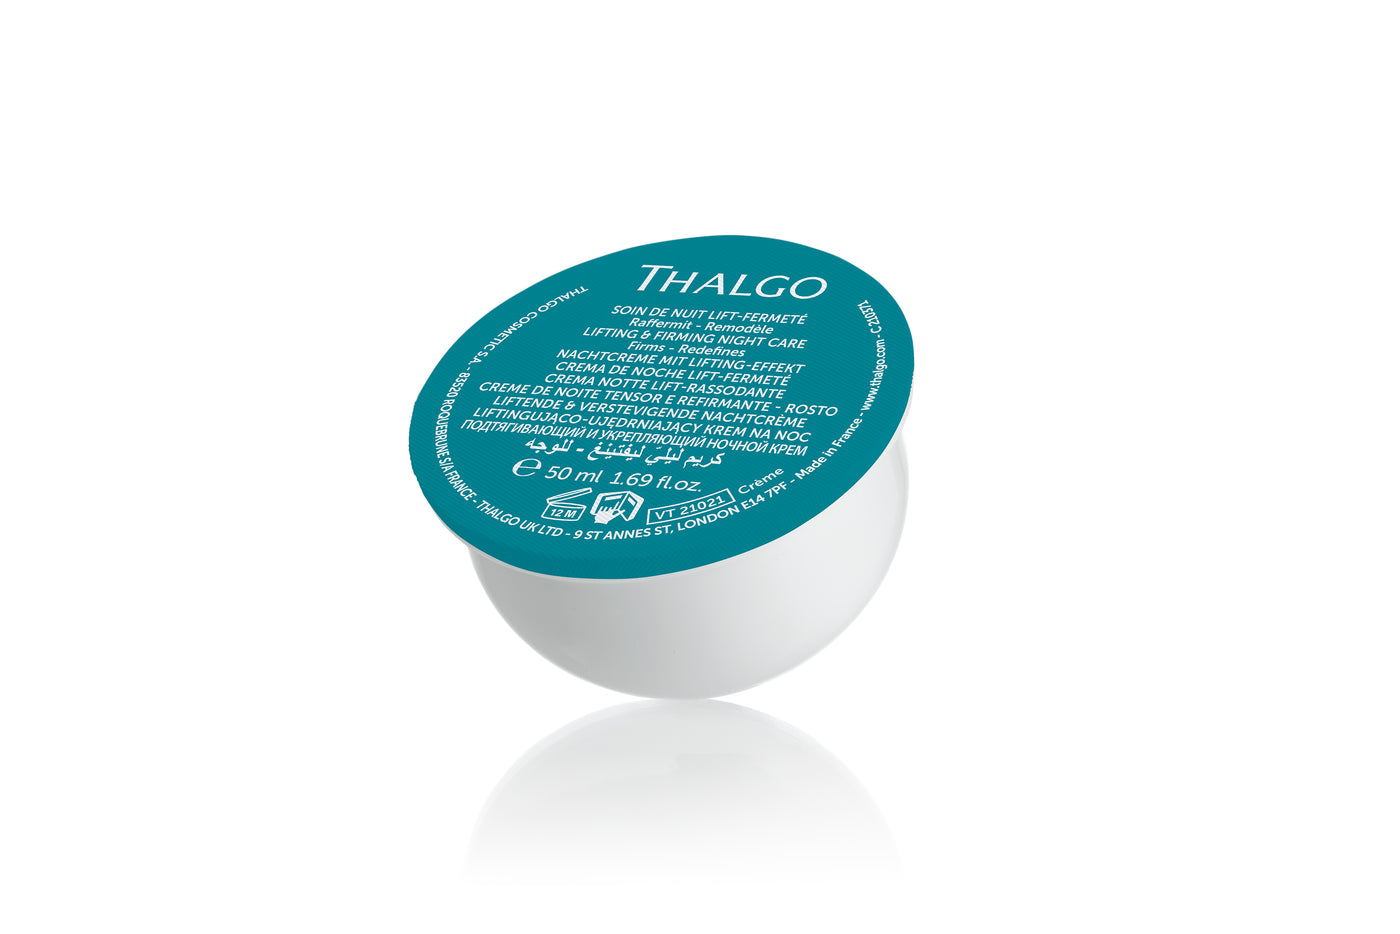 Thalgo Lifting & Firming Night Care, 50ml Refill